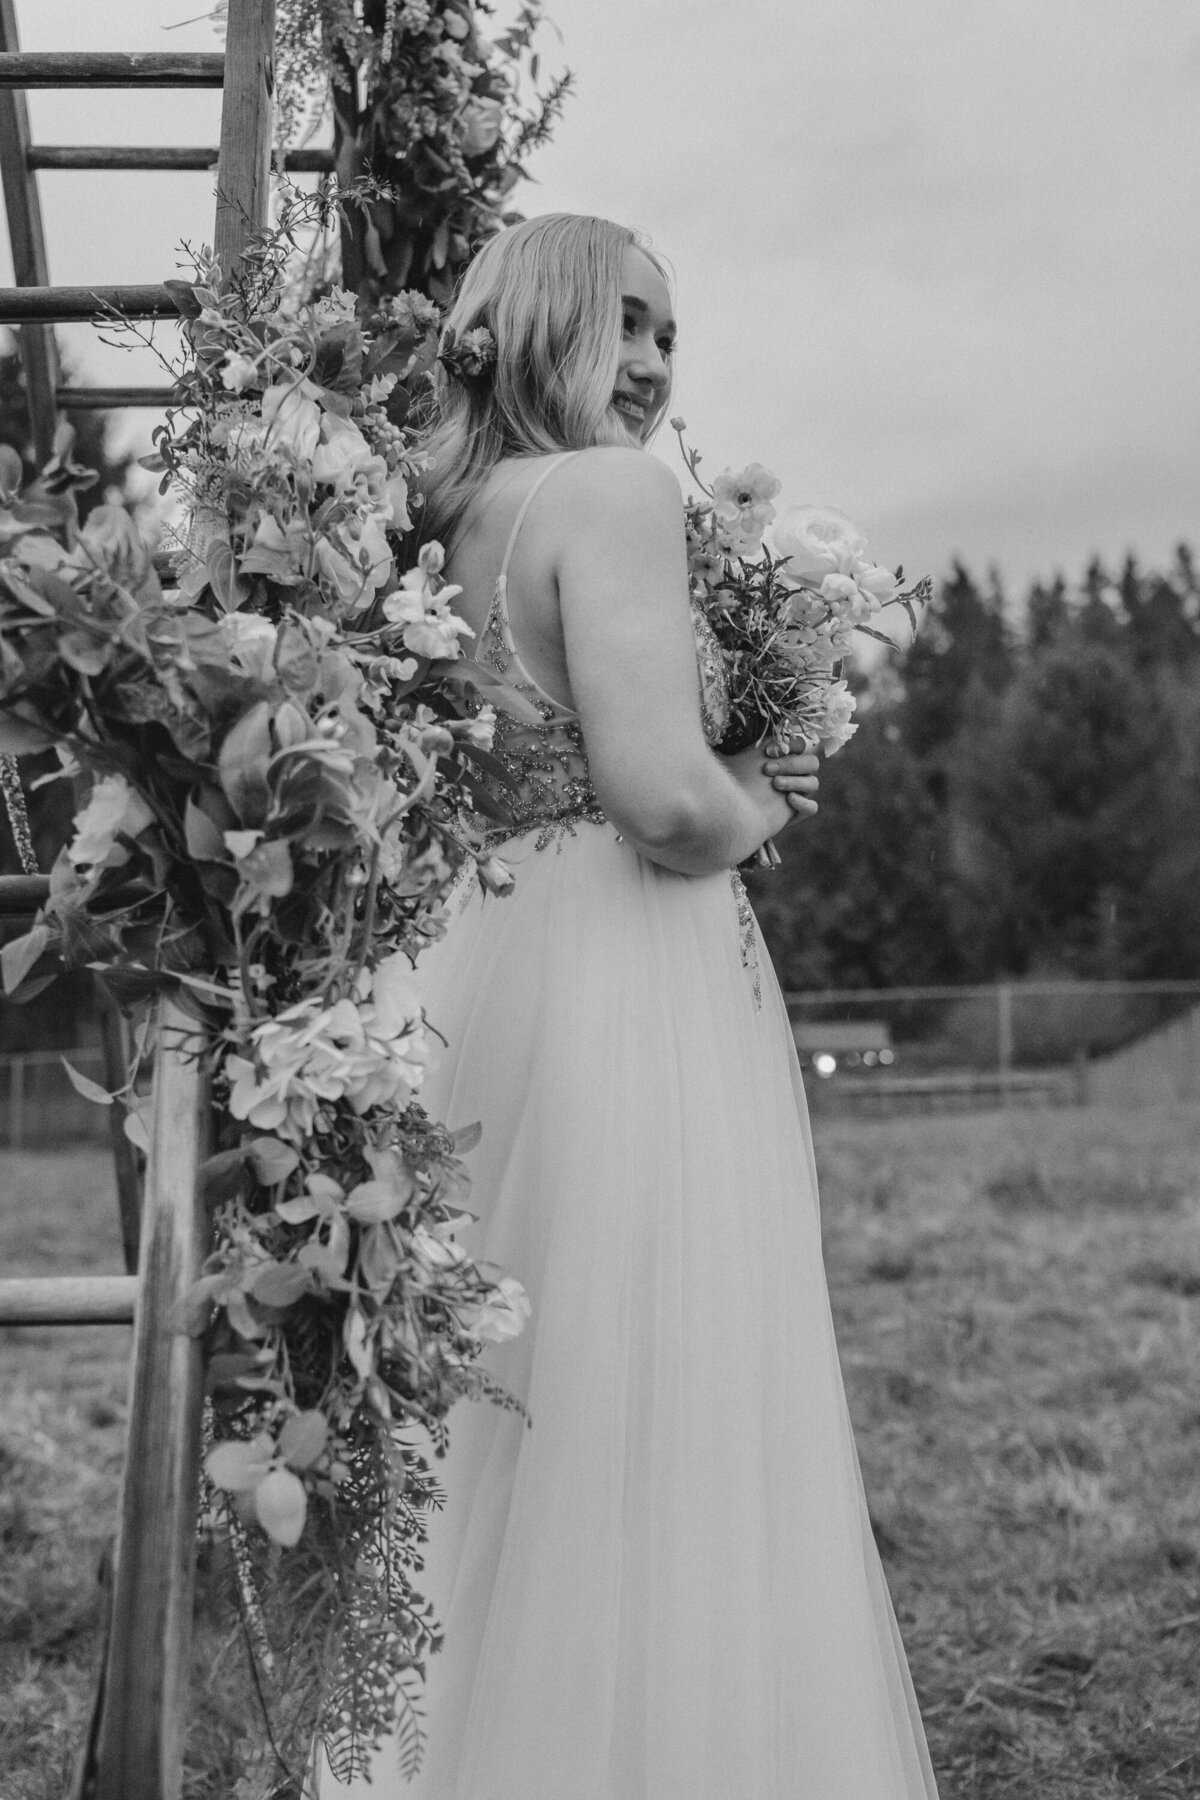 Jessica-Grant-Wedding-at-Infinity-Farm-Issaquah-SEATTLE-WA-Amy-Law-Photography-94